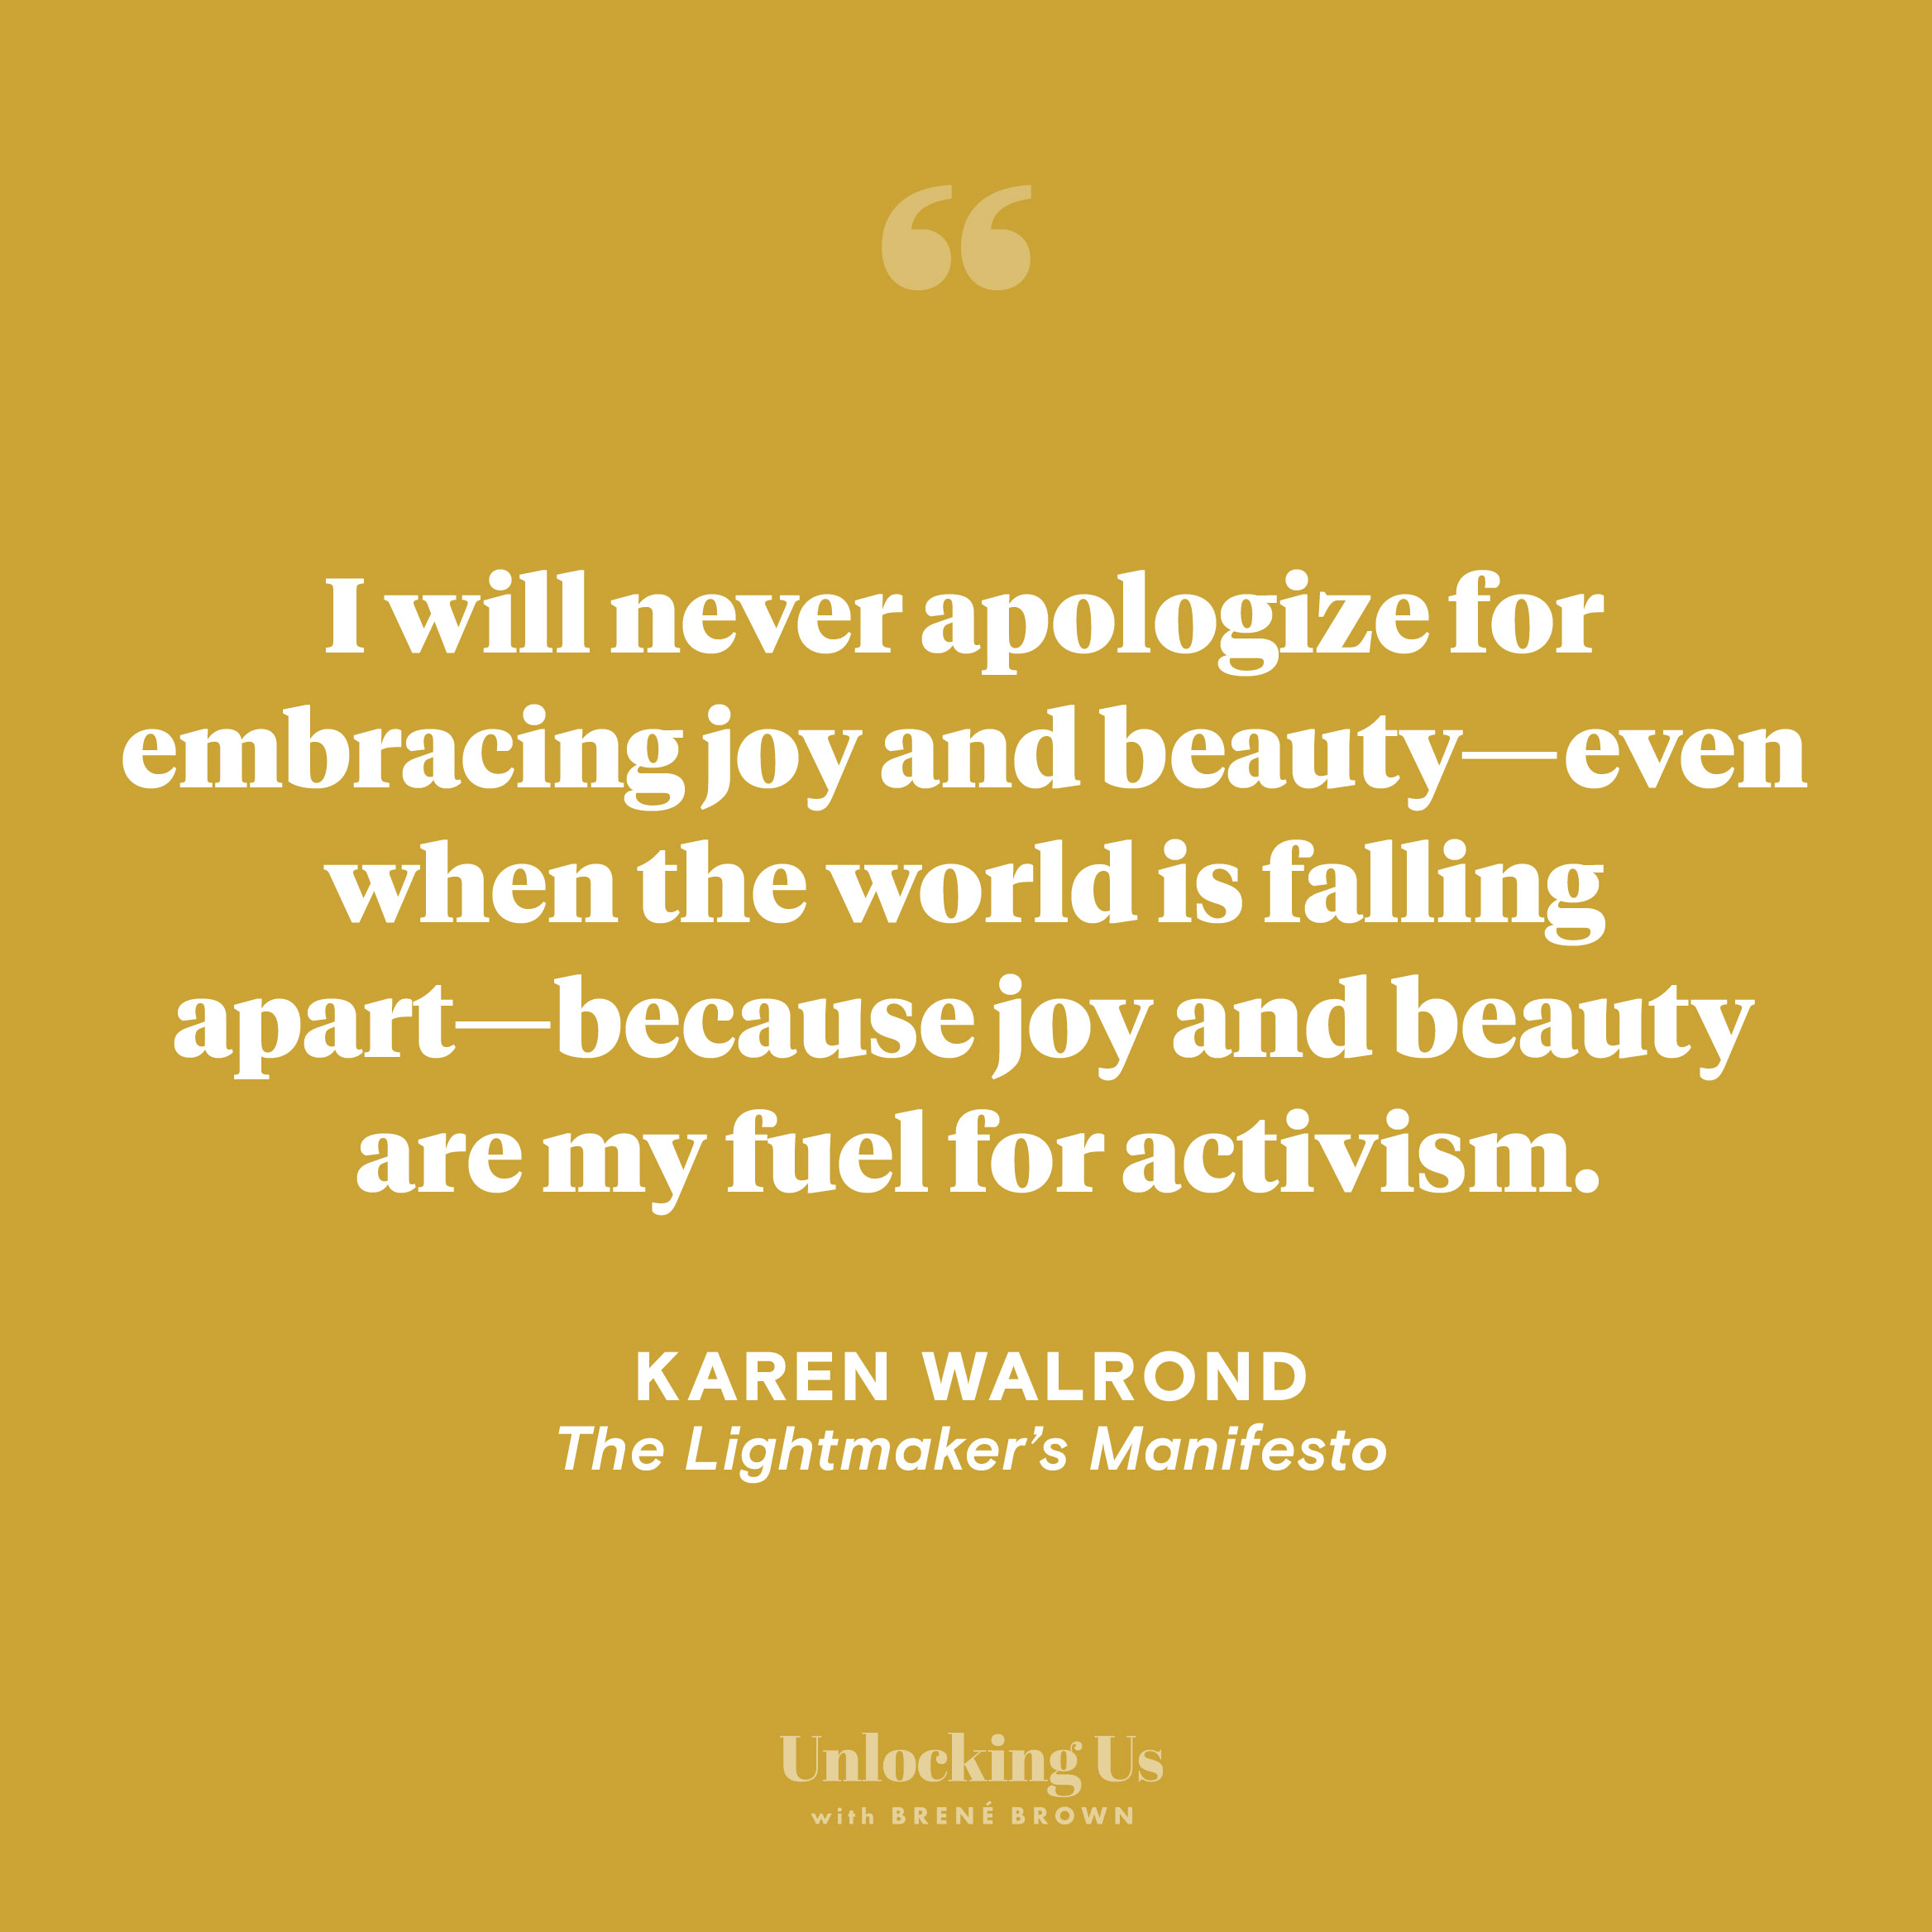 A quote from Karen Walrond, from the Unlocking Us podcast with Brené Brown: I will never apologize for embracing joy and beauty—even when the world is falling apart—because joy and beauty are my fuel for activism.